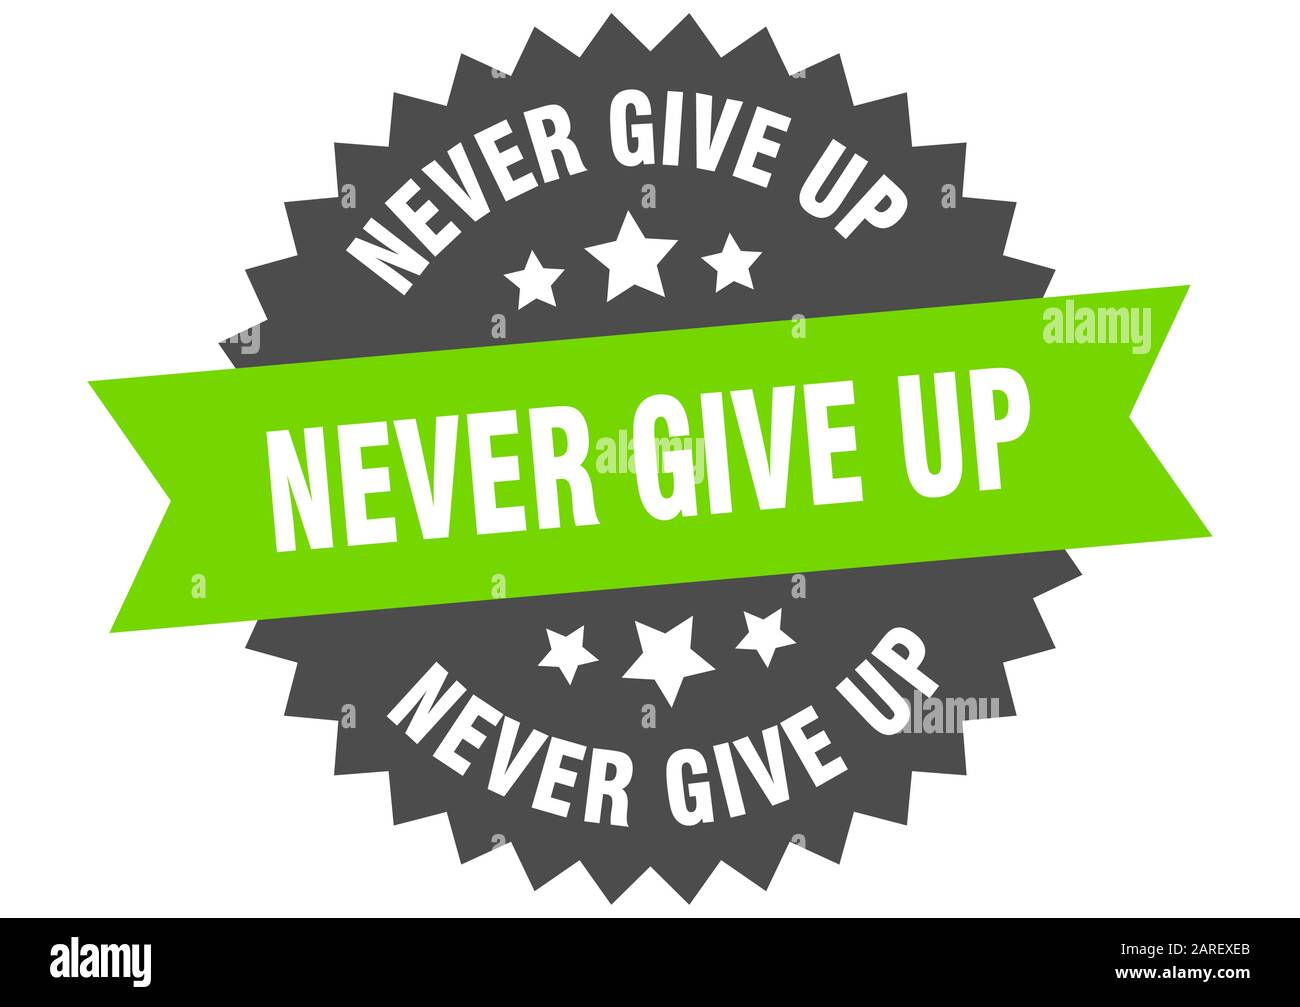 Never give up' Sticker